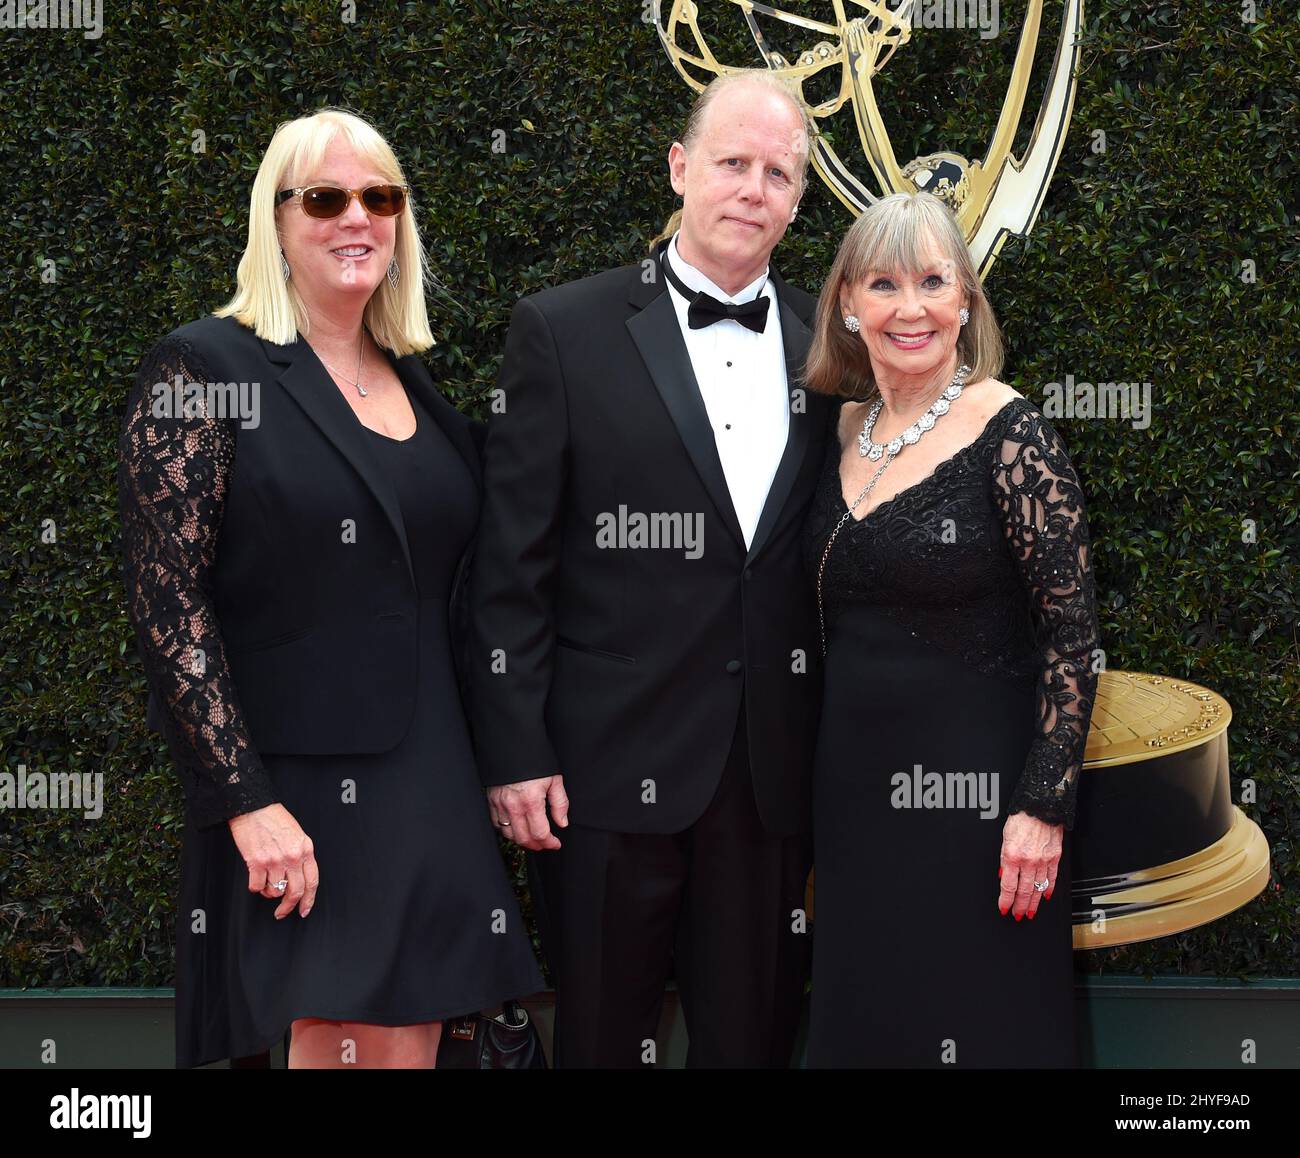 Marla Adams arriving at the 45th Annual Daytime Emmy Awards held at the Pasadena Civic Center on April 29, 2018 in Pasadena, CA Stock Photo